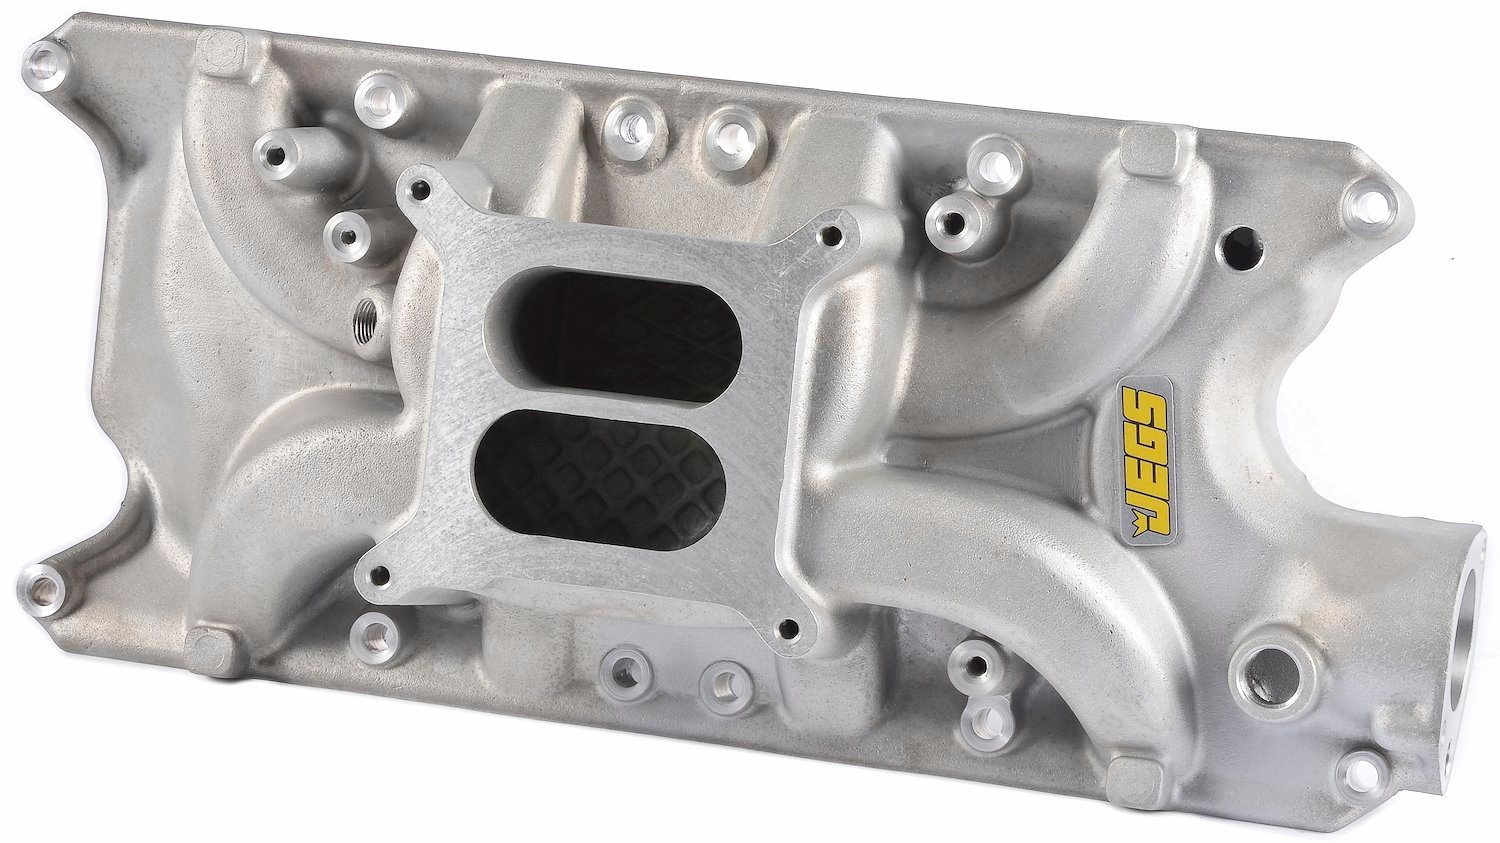 Intake Manifold for 1962-1985 Small Block Ford 260, 289 & 302 (Except Boss 302), Dual Plane [Natural]